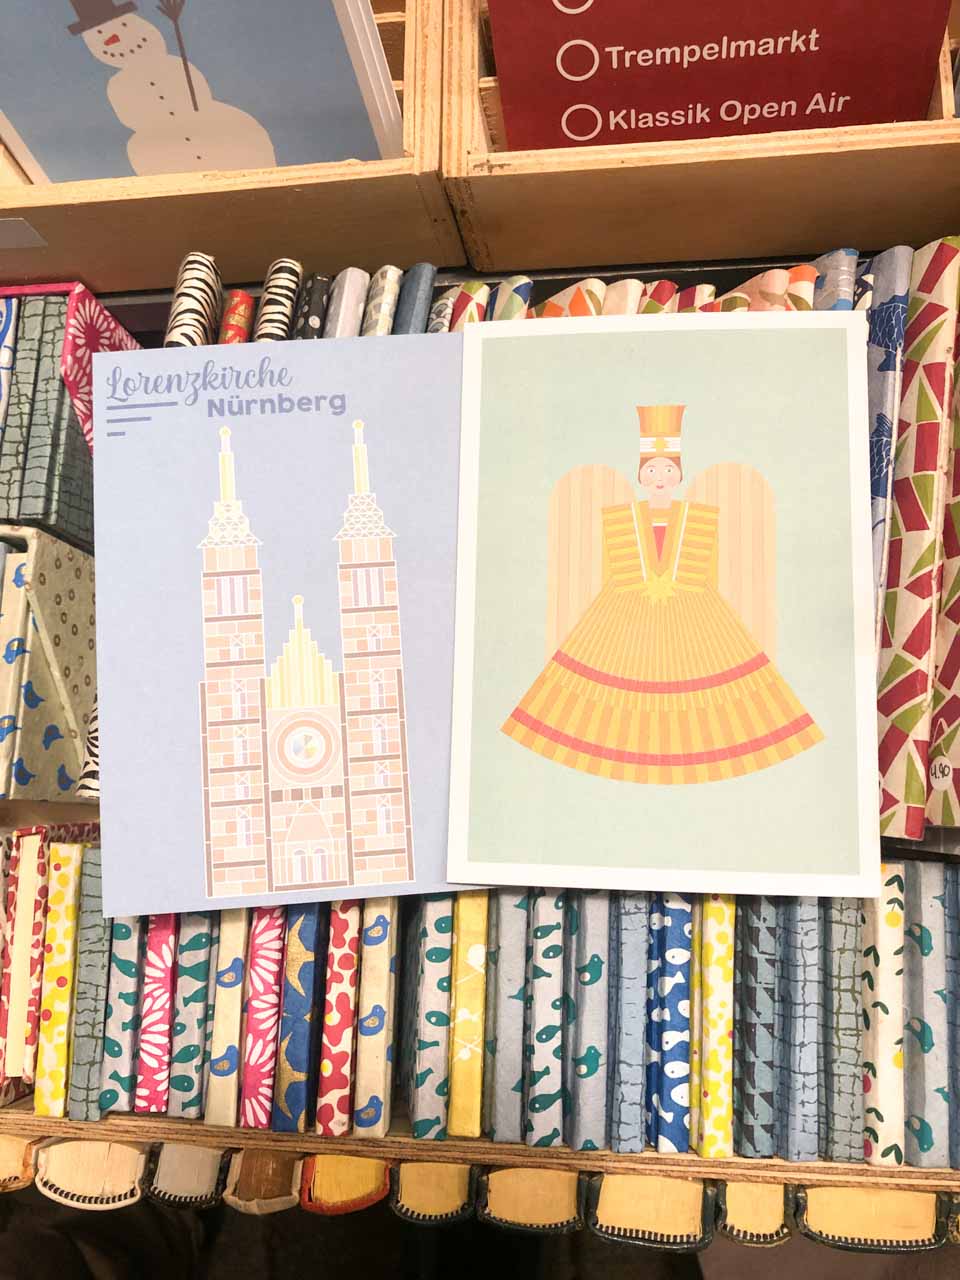 Festive Christmas cards on display at a Nuremberg market stall, featuring the Lorenzkirche and the Rauschgoldengel